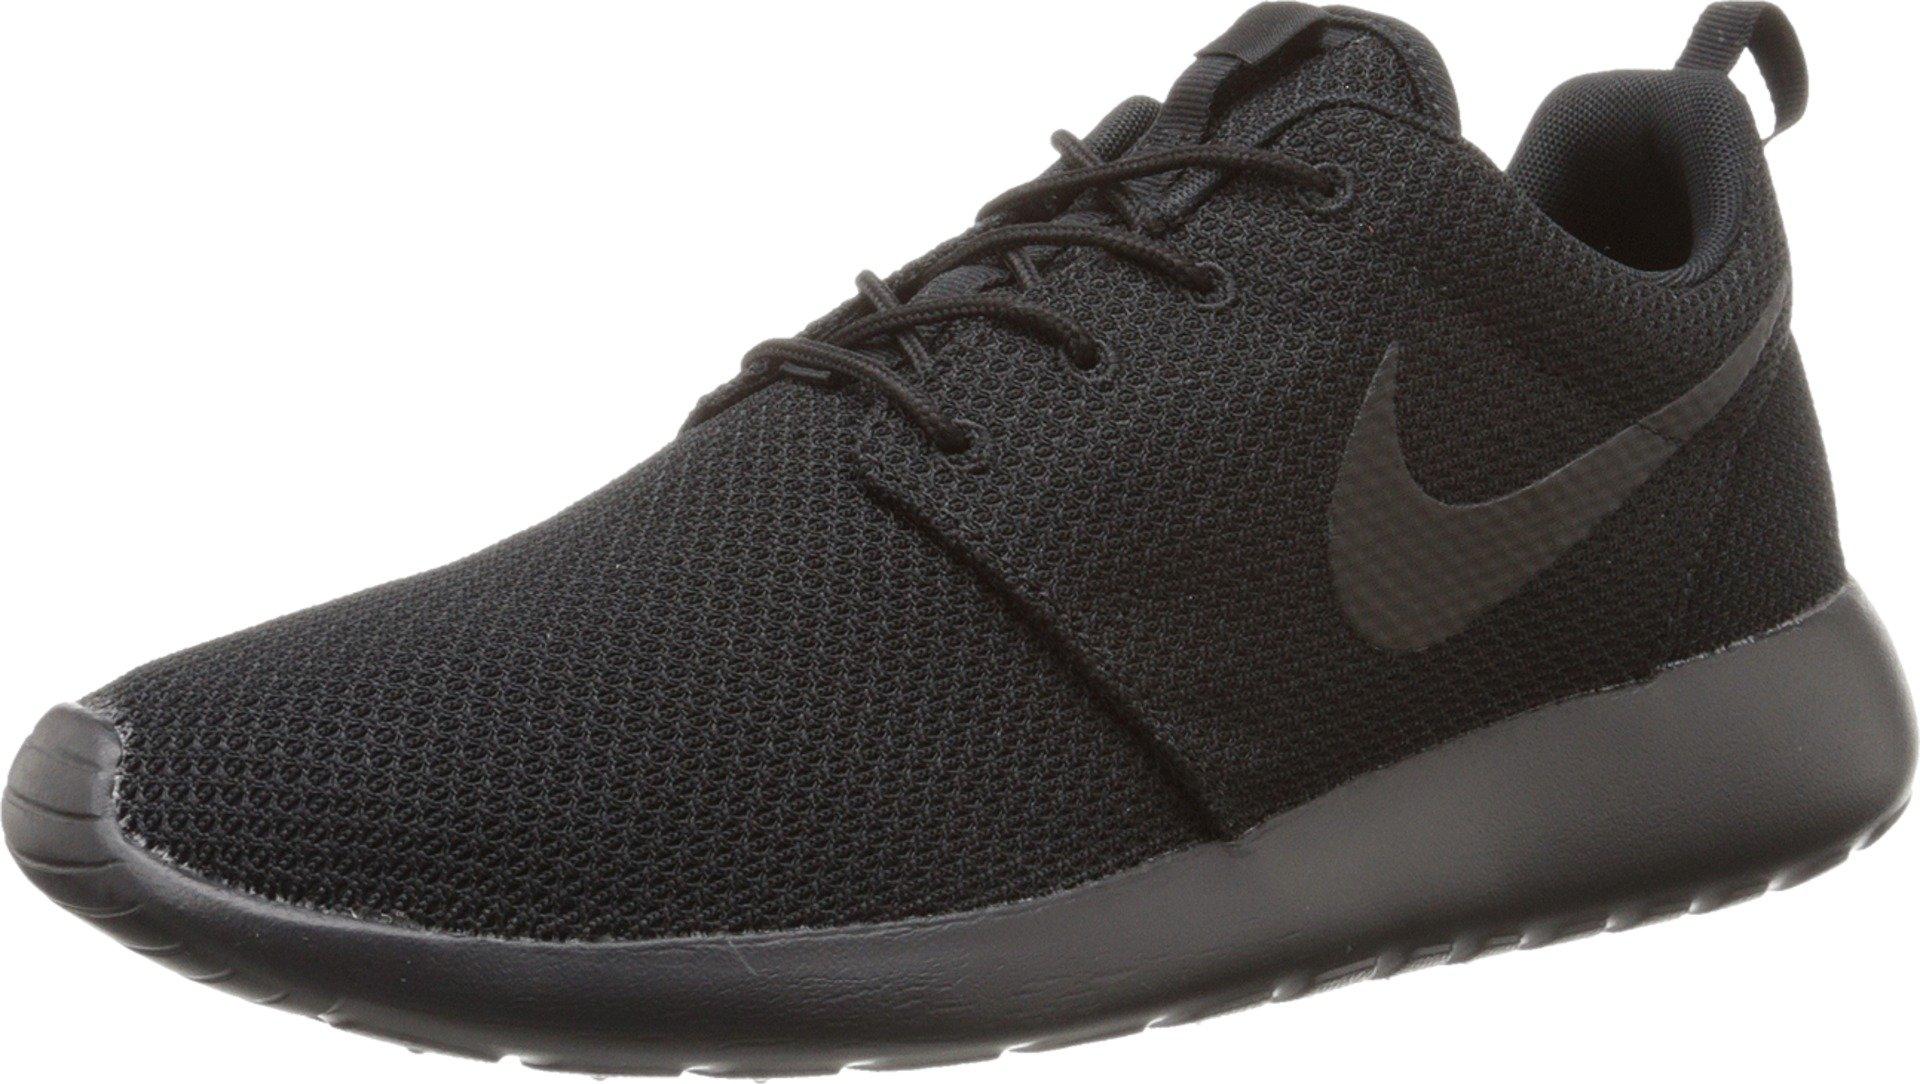 Nike Synthetic Roshe One - Shoes in Black/White (Black) for Men - Save 43%  | Lyst